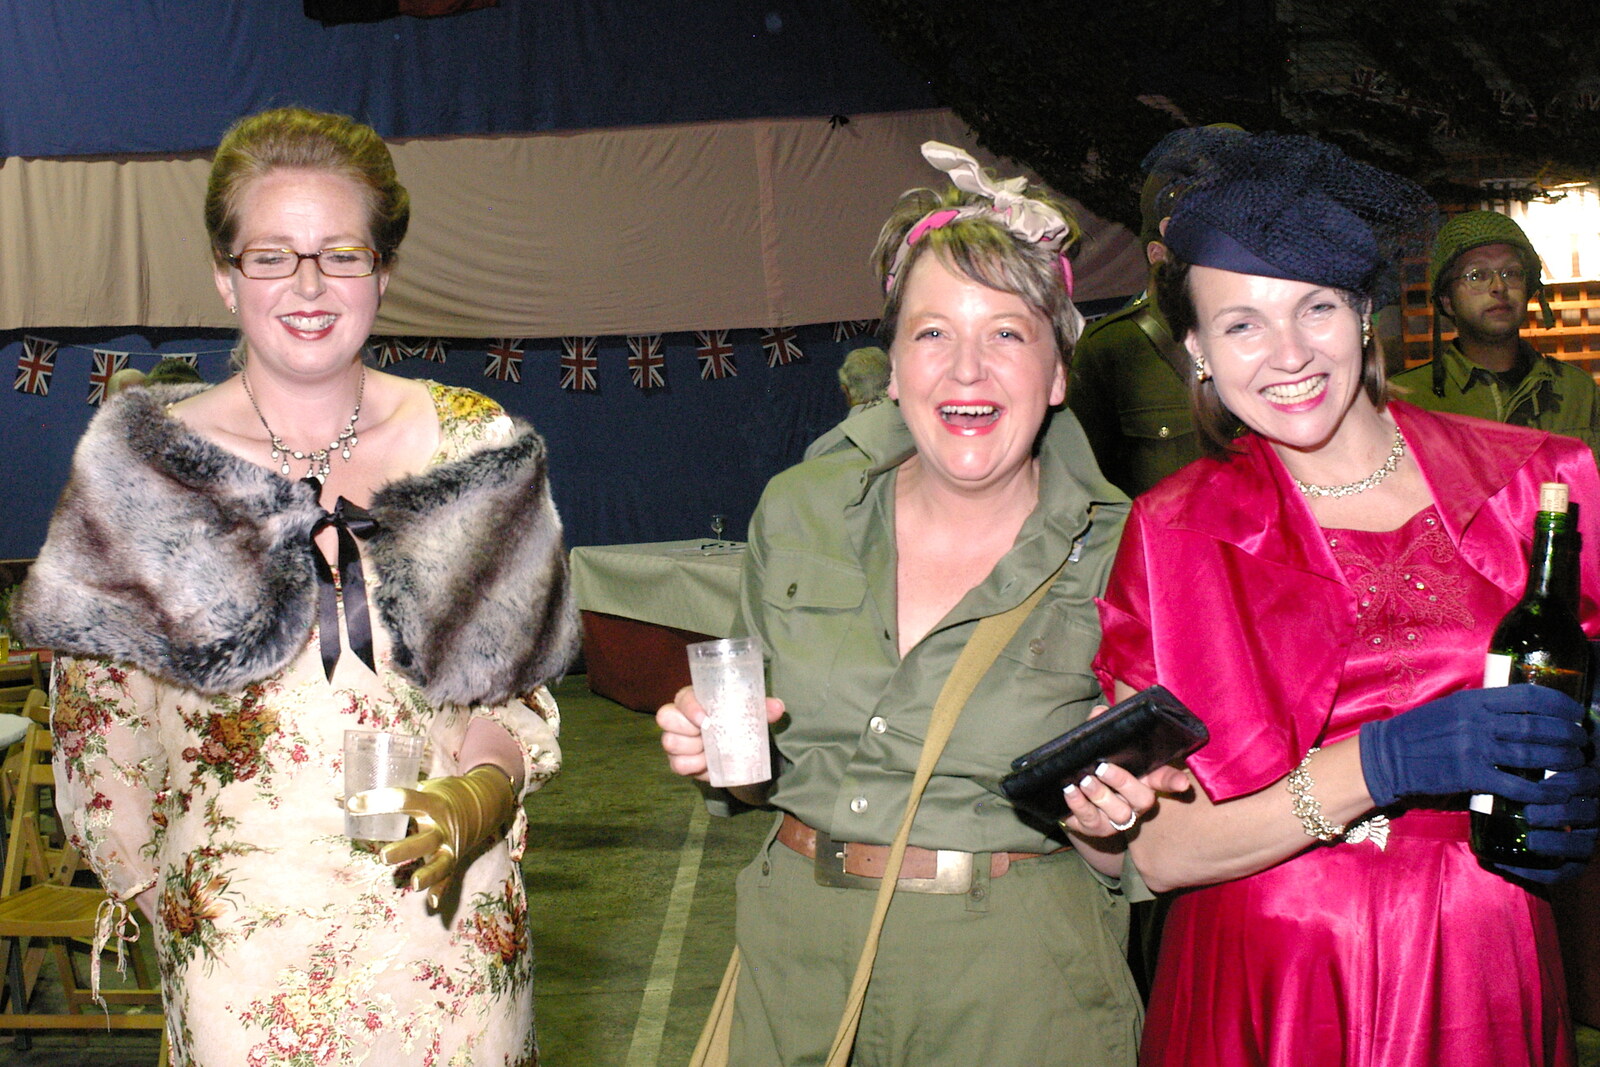 A land girl from Another 1940s Dance, Ellough Airfield, Beccles, Suffolk - 24th June 2005